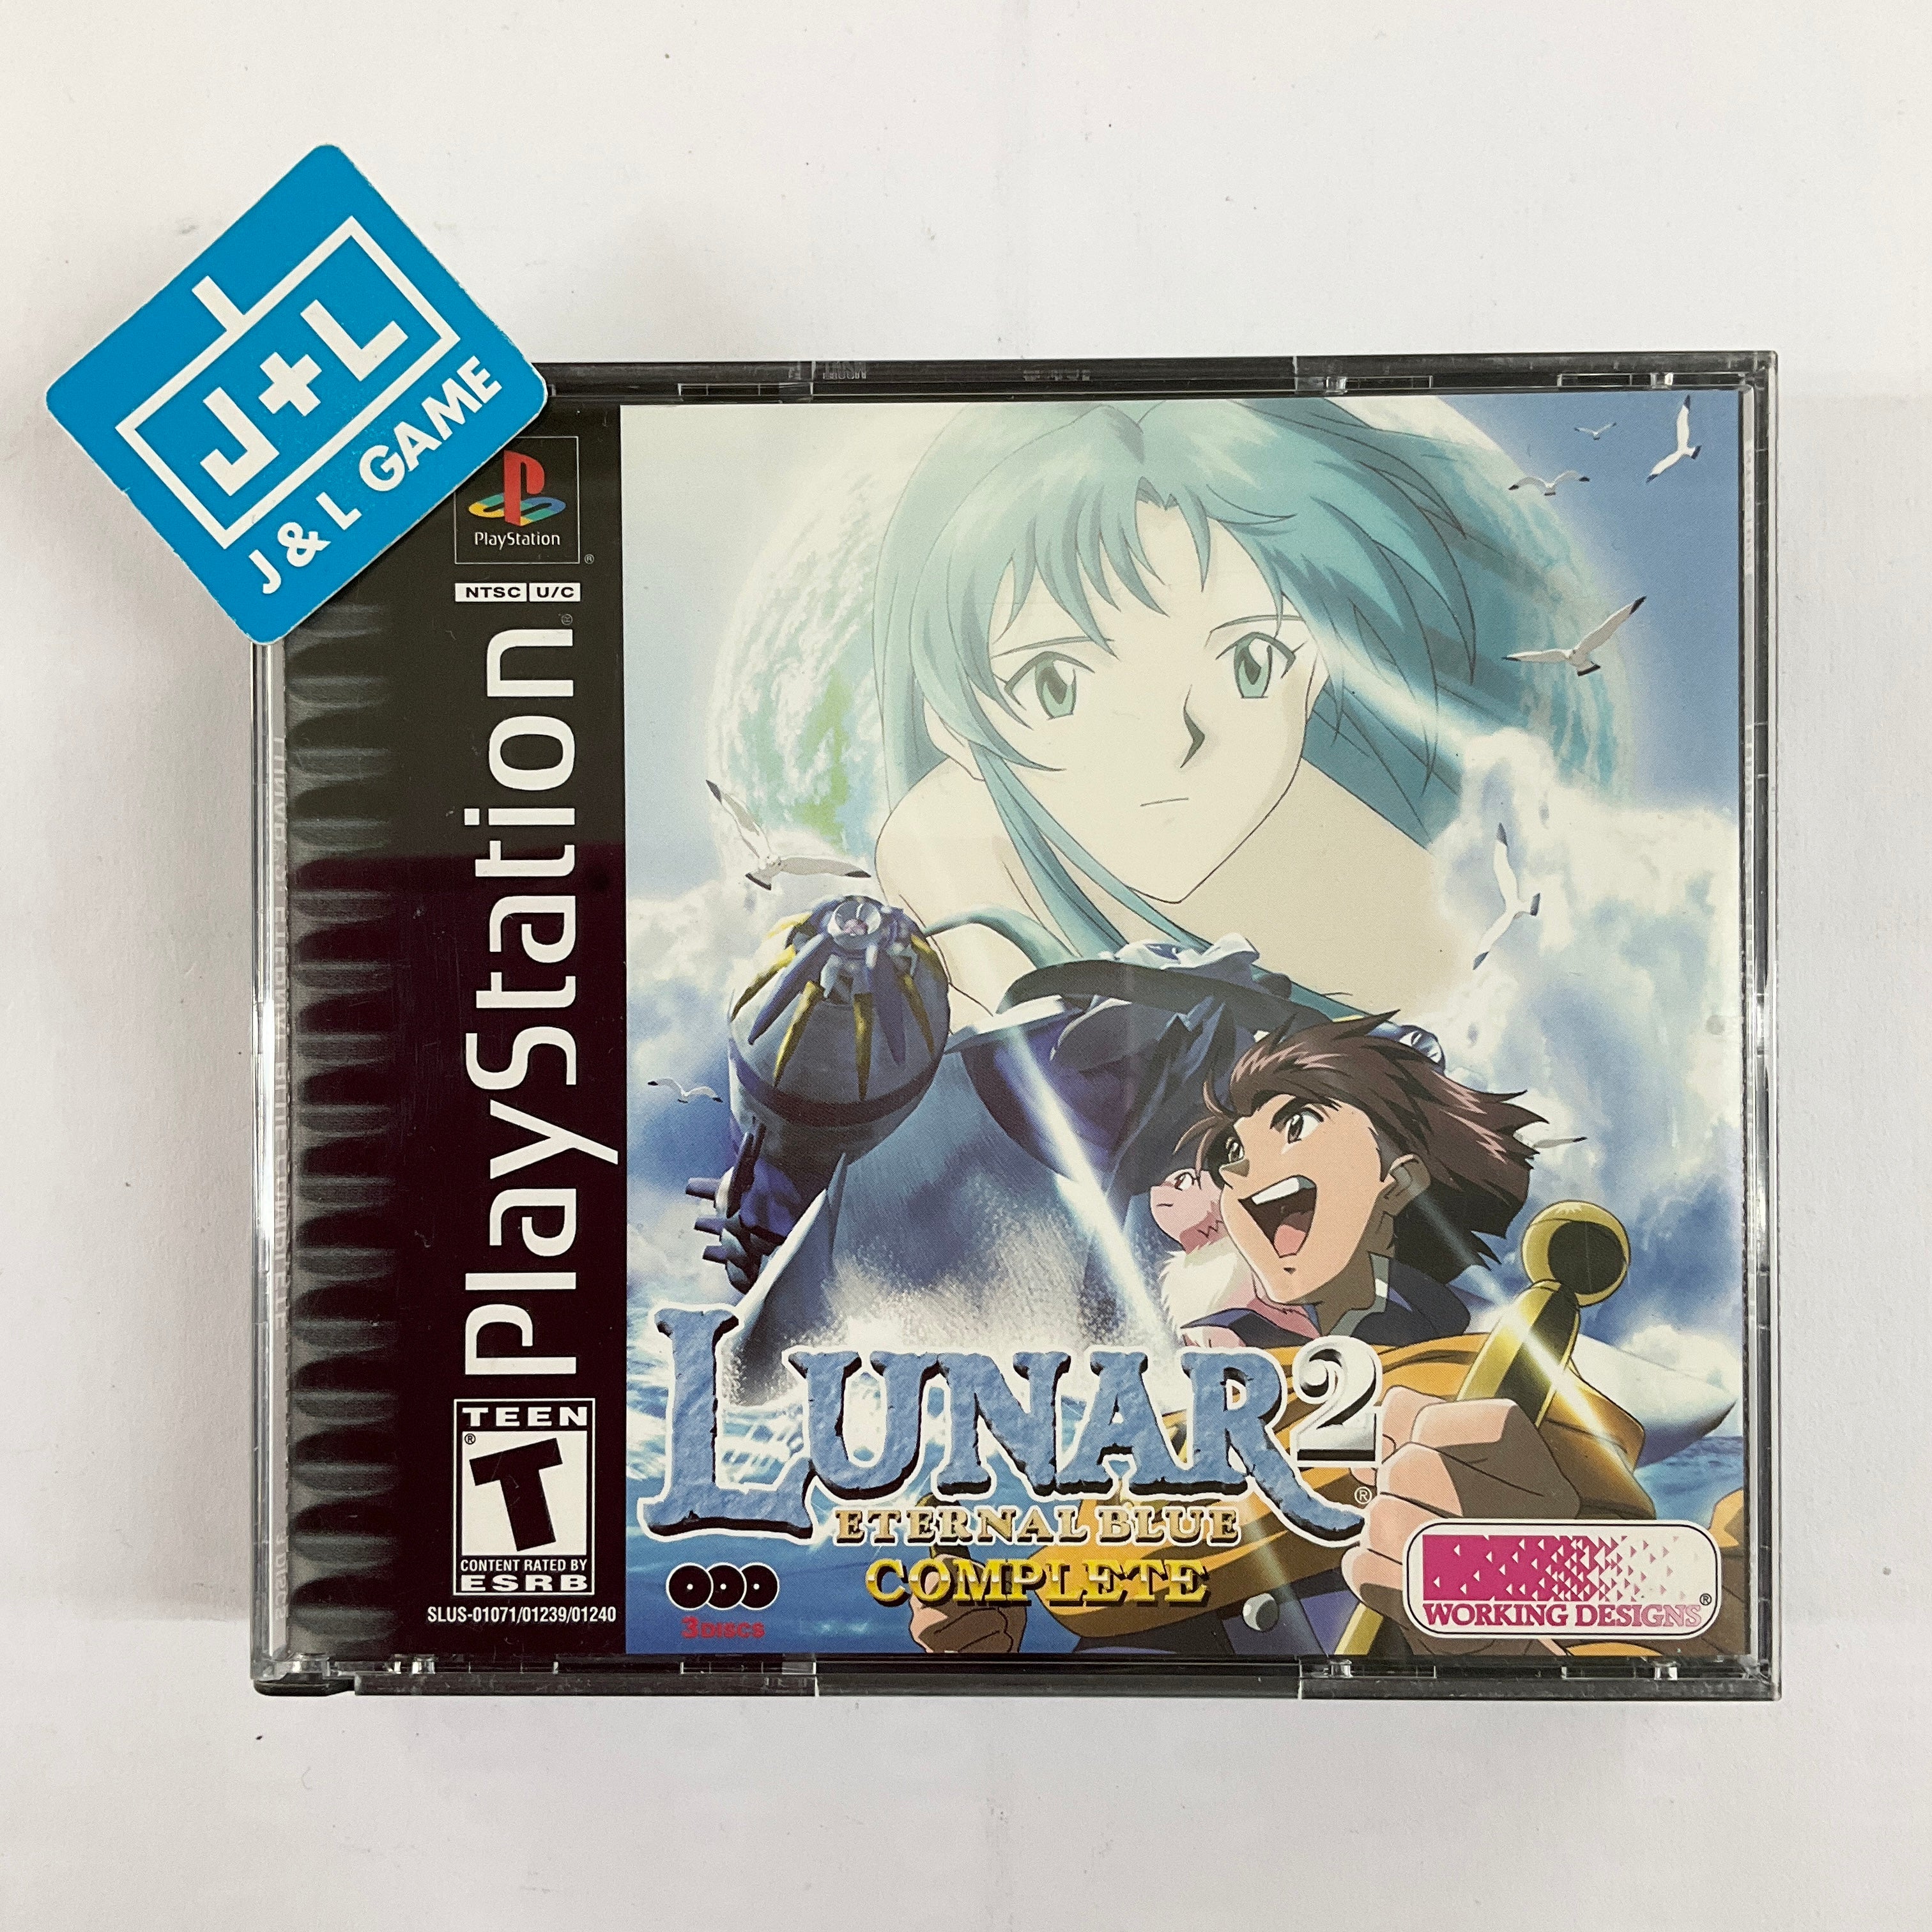 Lunar 2: Eternal Blue Complete - (PS1) PlayStation 1 [Pre-Owned] Video Games Working Designs   